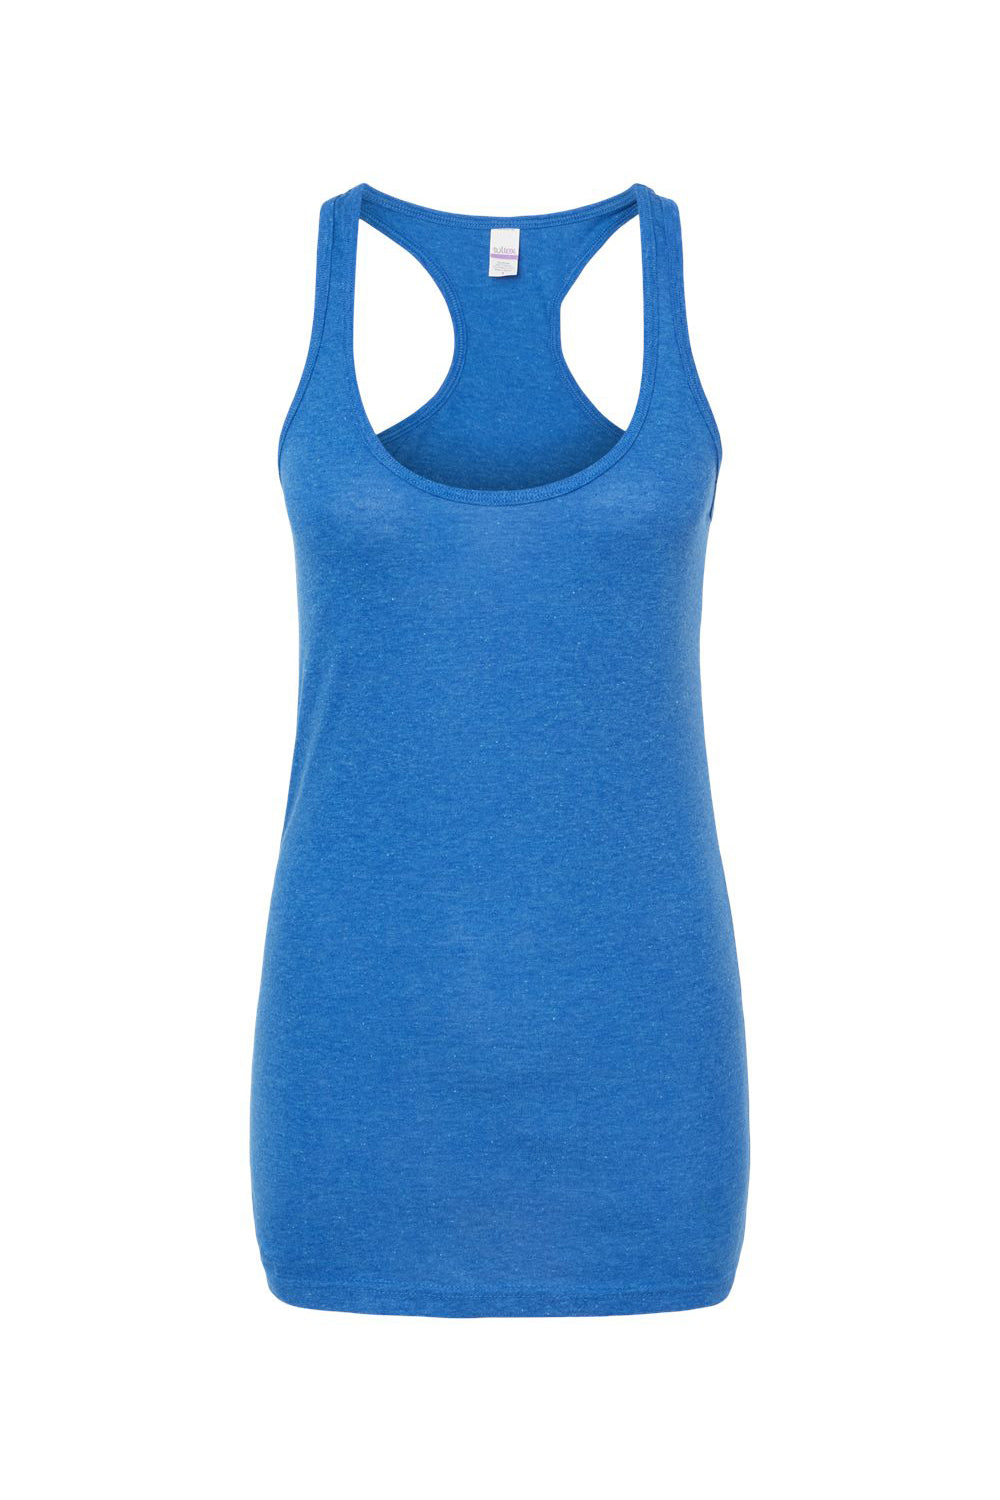 Tultex 190 Womens Poly-Rich Racerback Tank Top Heather Royal Blue Flat Front